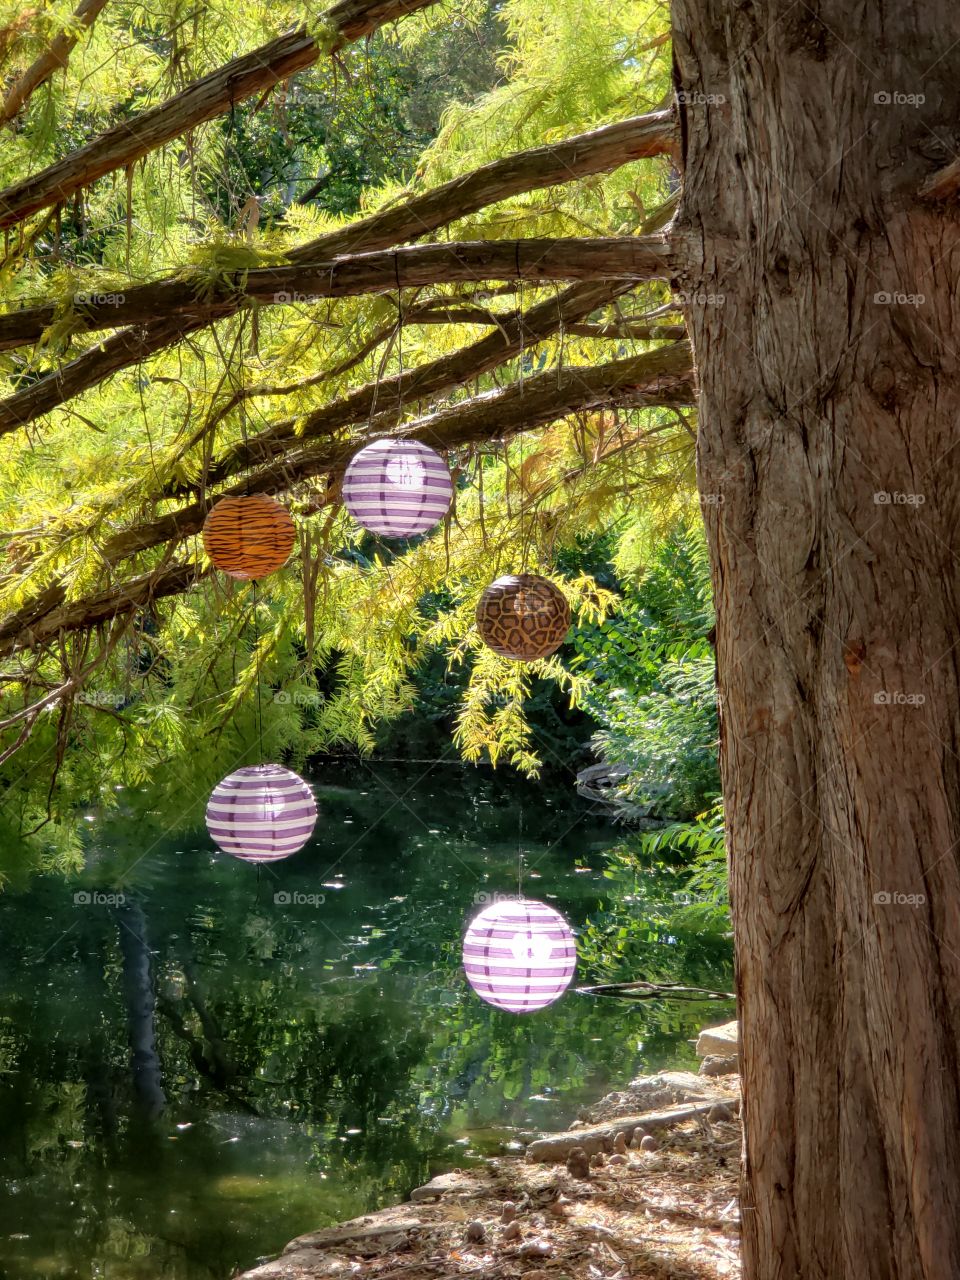 lanterns hanging from tree along the creek